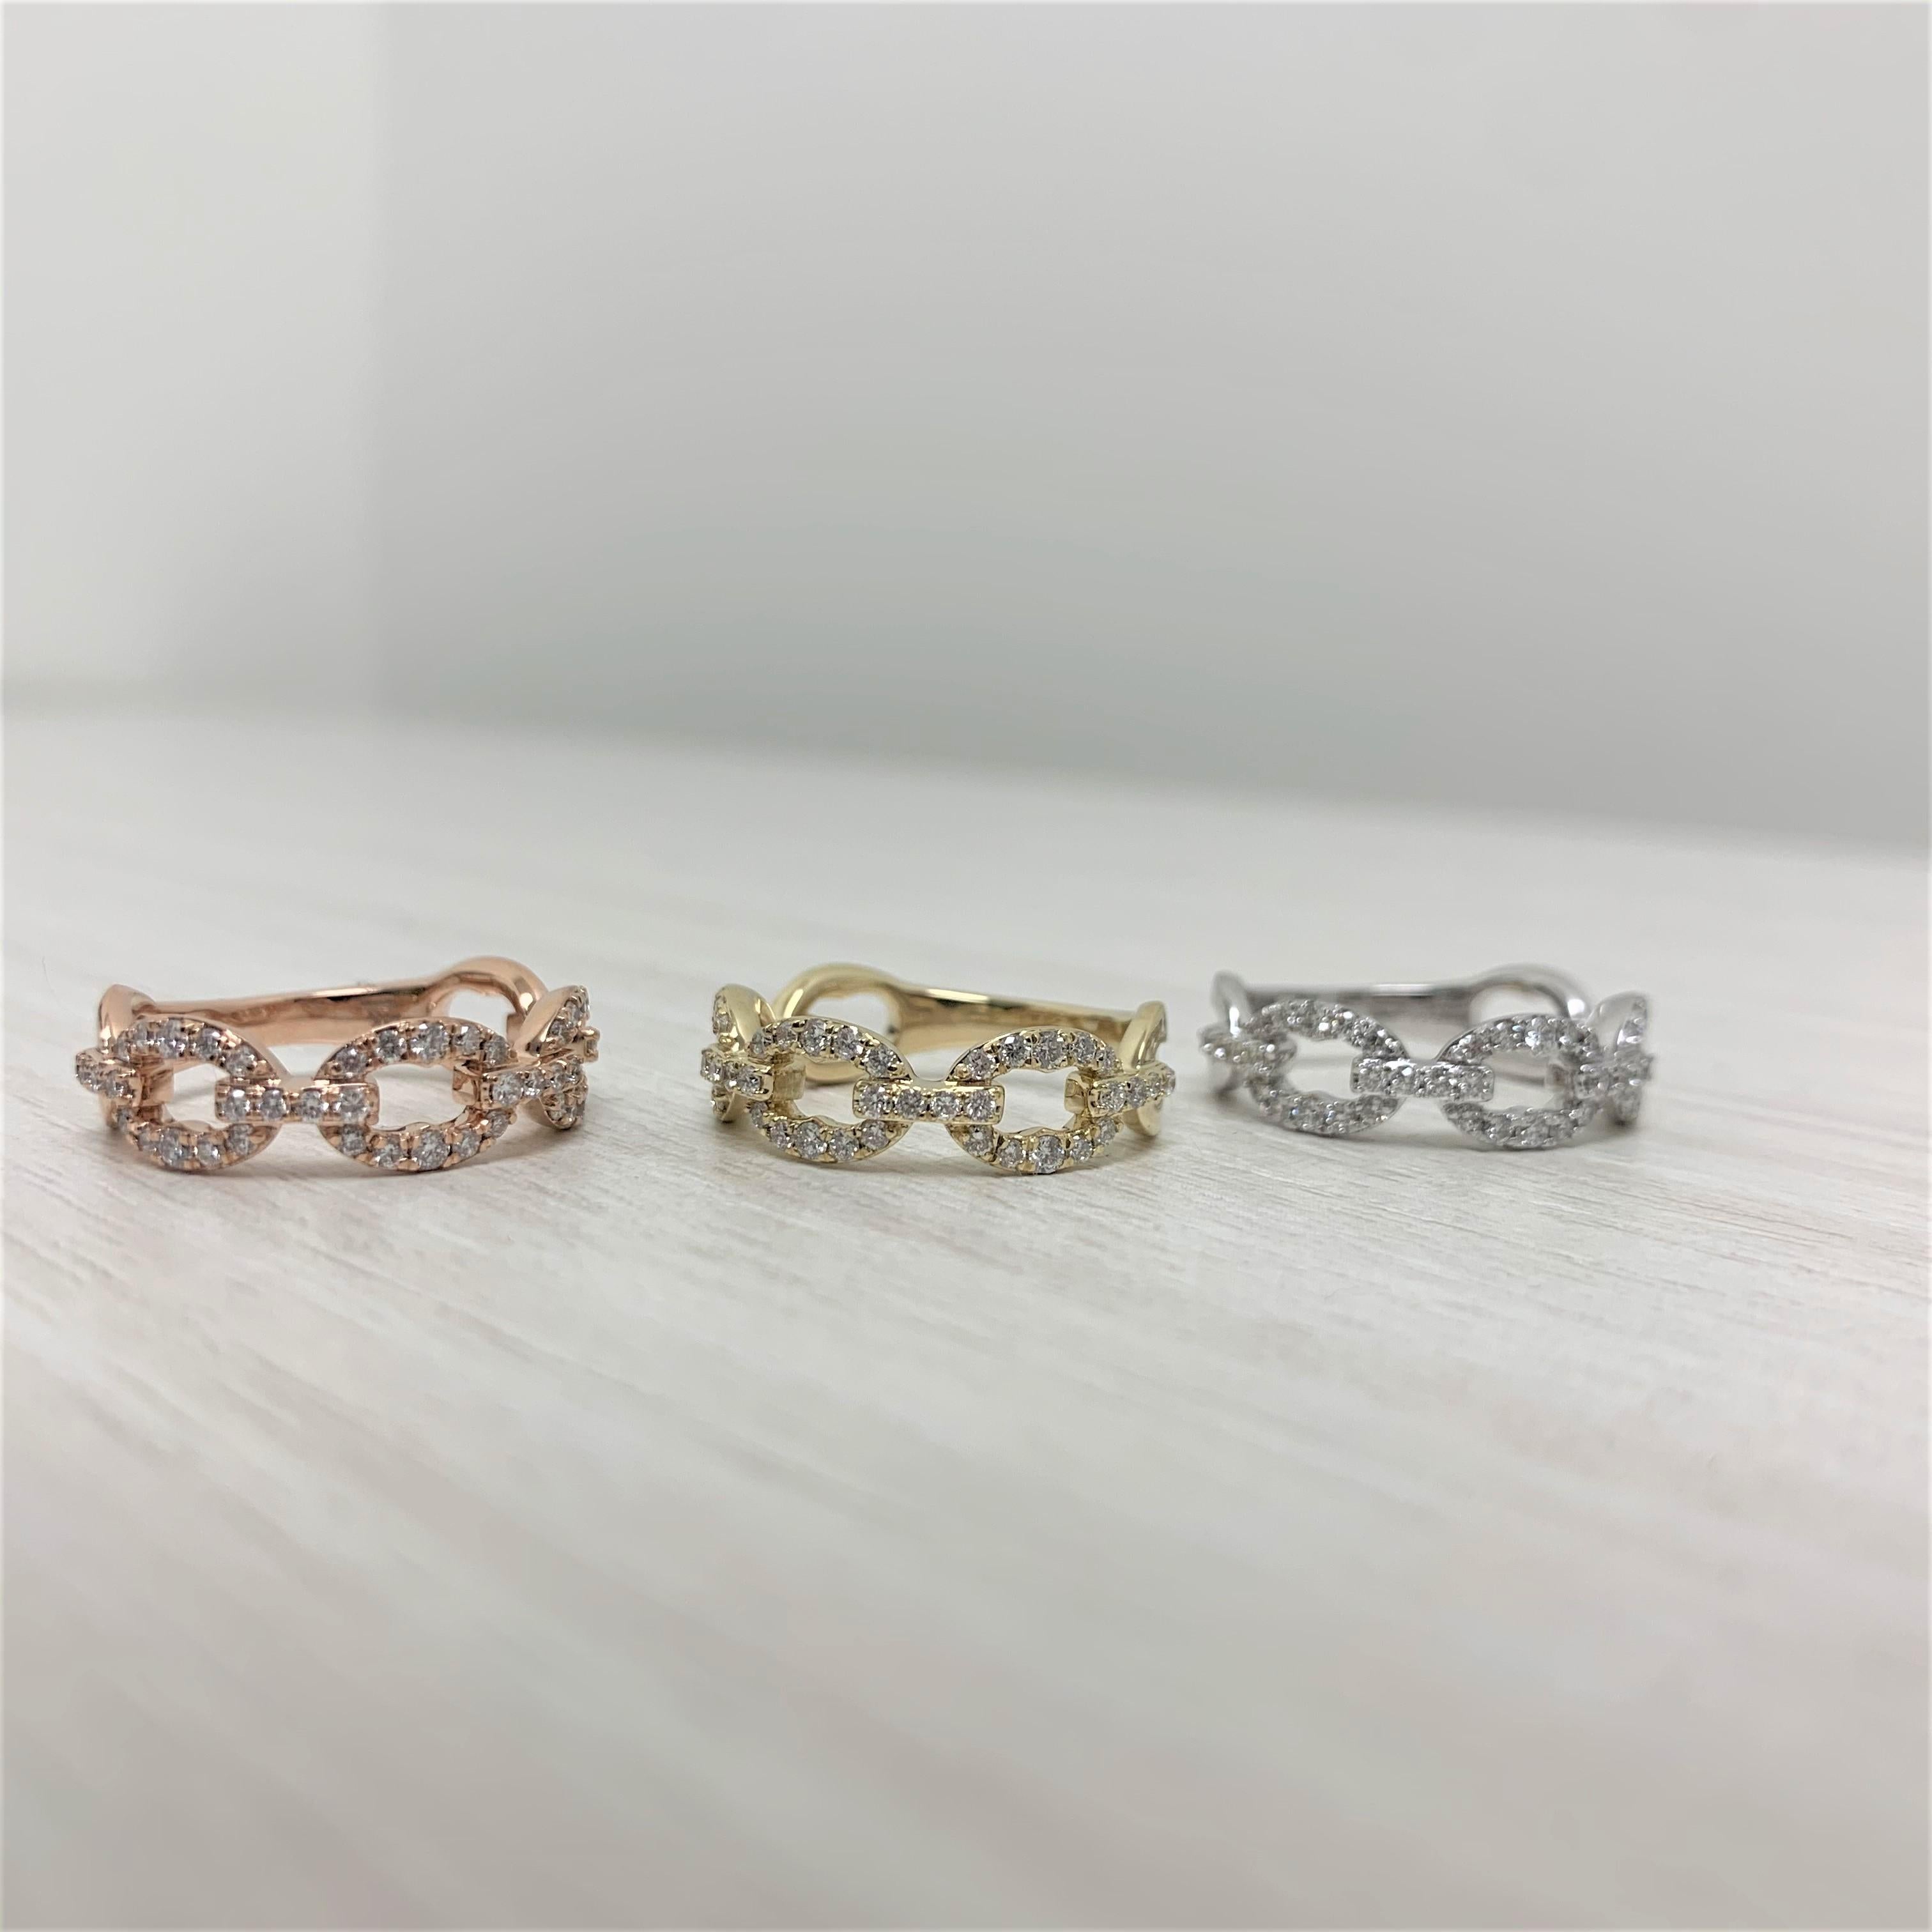 Crafted of 14K gold this Beautiful Diamond Link Band Features 46 Round Natural Diamonds weighing approximately 0.47 ct Color & Clarity GH-SI. Ring are available in White, Yellow & Rose gold. Ring can be sized 1 size up or down by your local fine